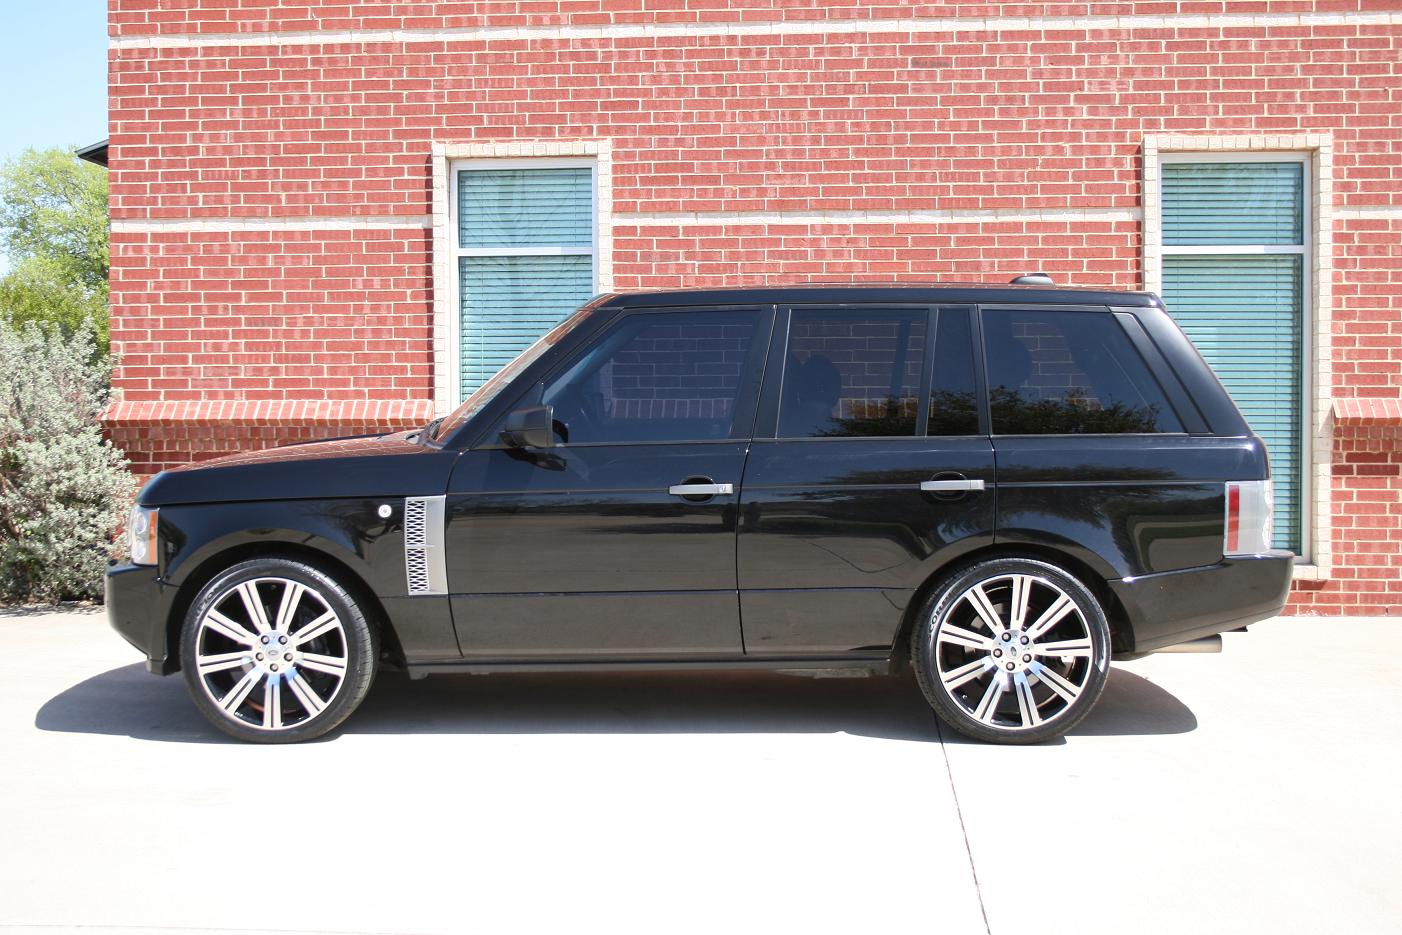 22" stormers machined/black on 08 Range Rover Supercharged.